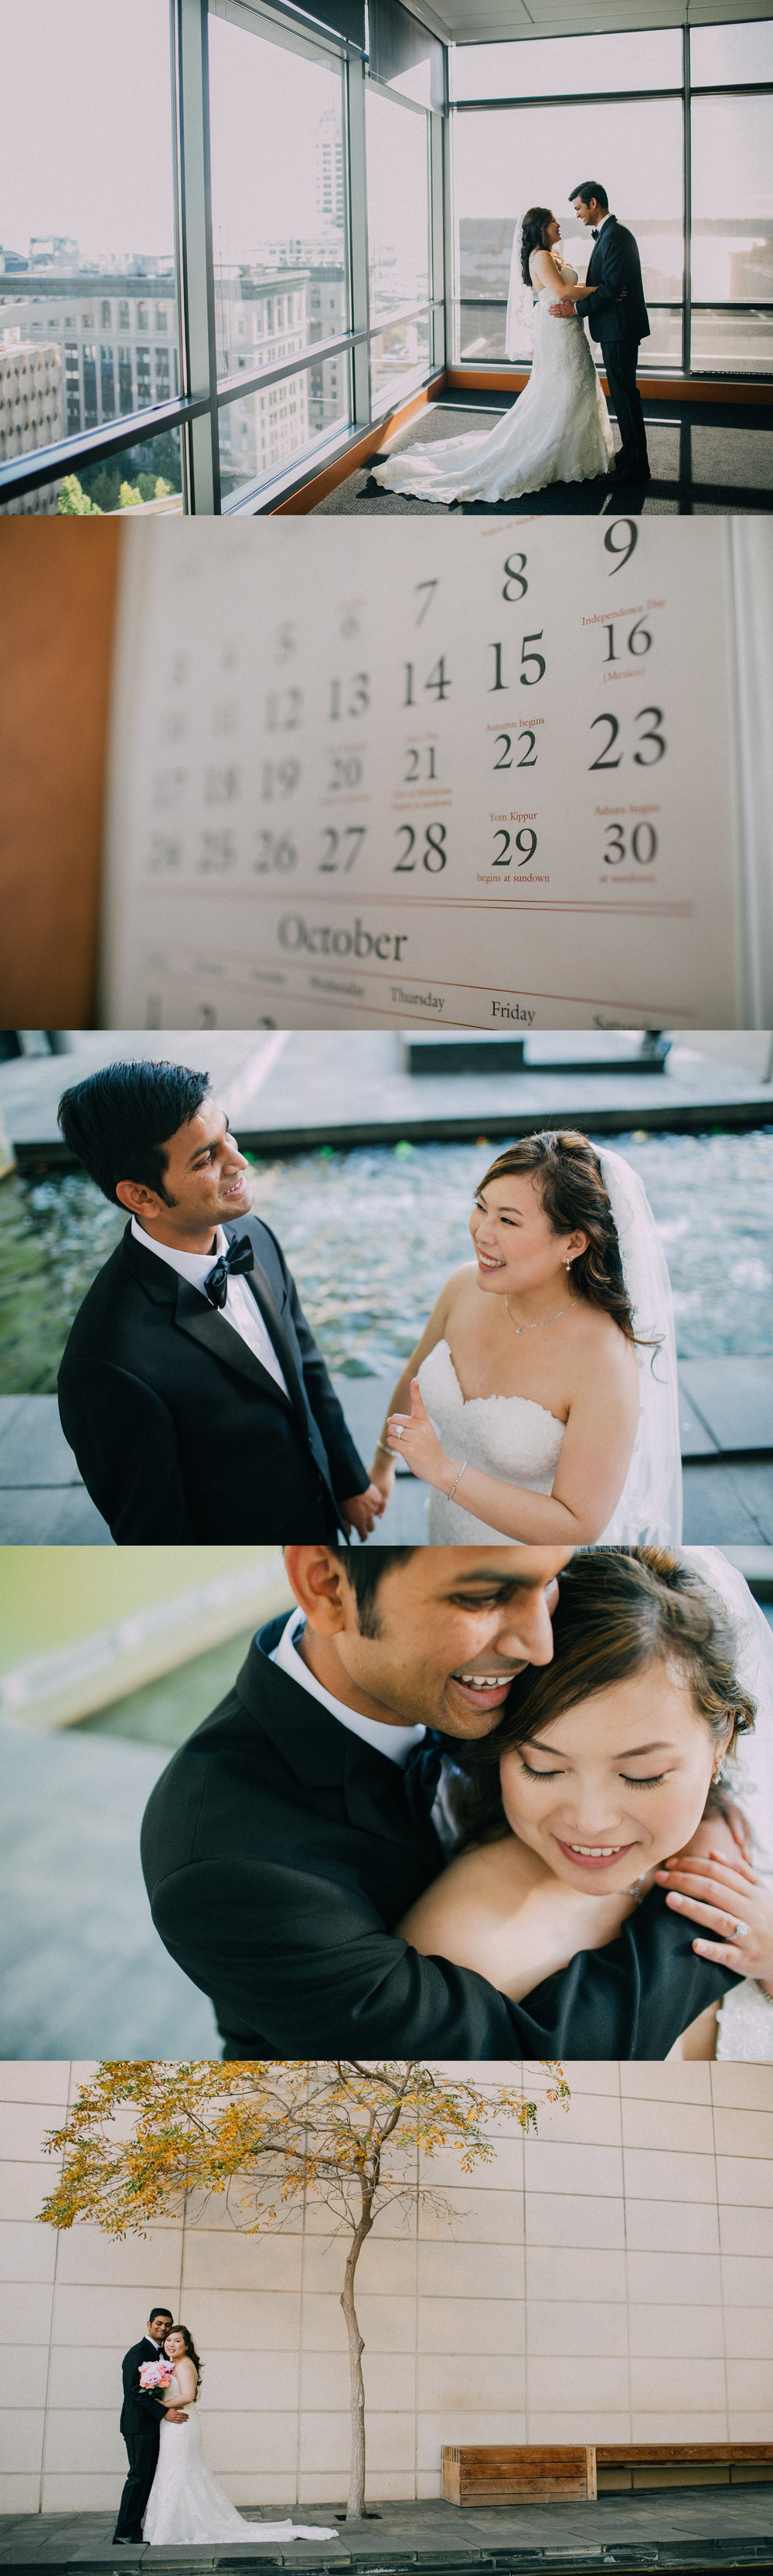 seattle courthouse and elopement photographer wedding-4.jpg